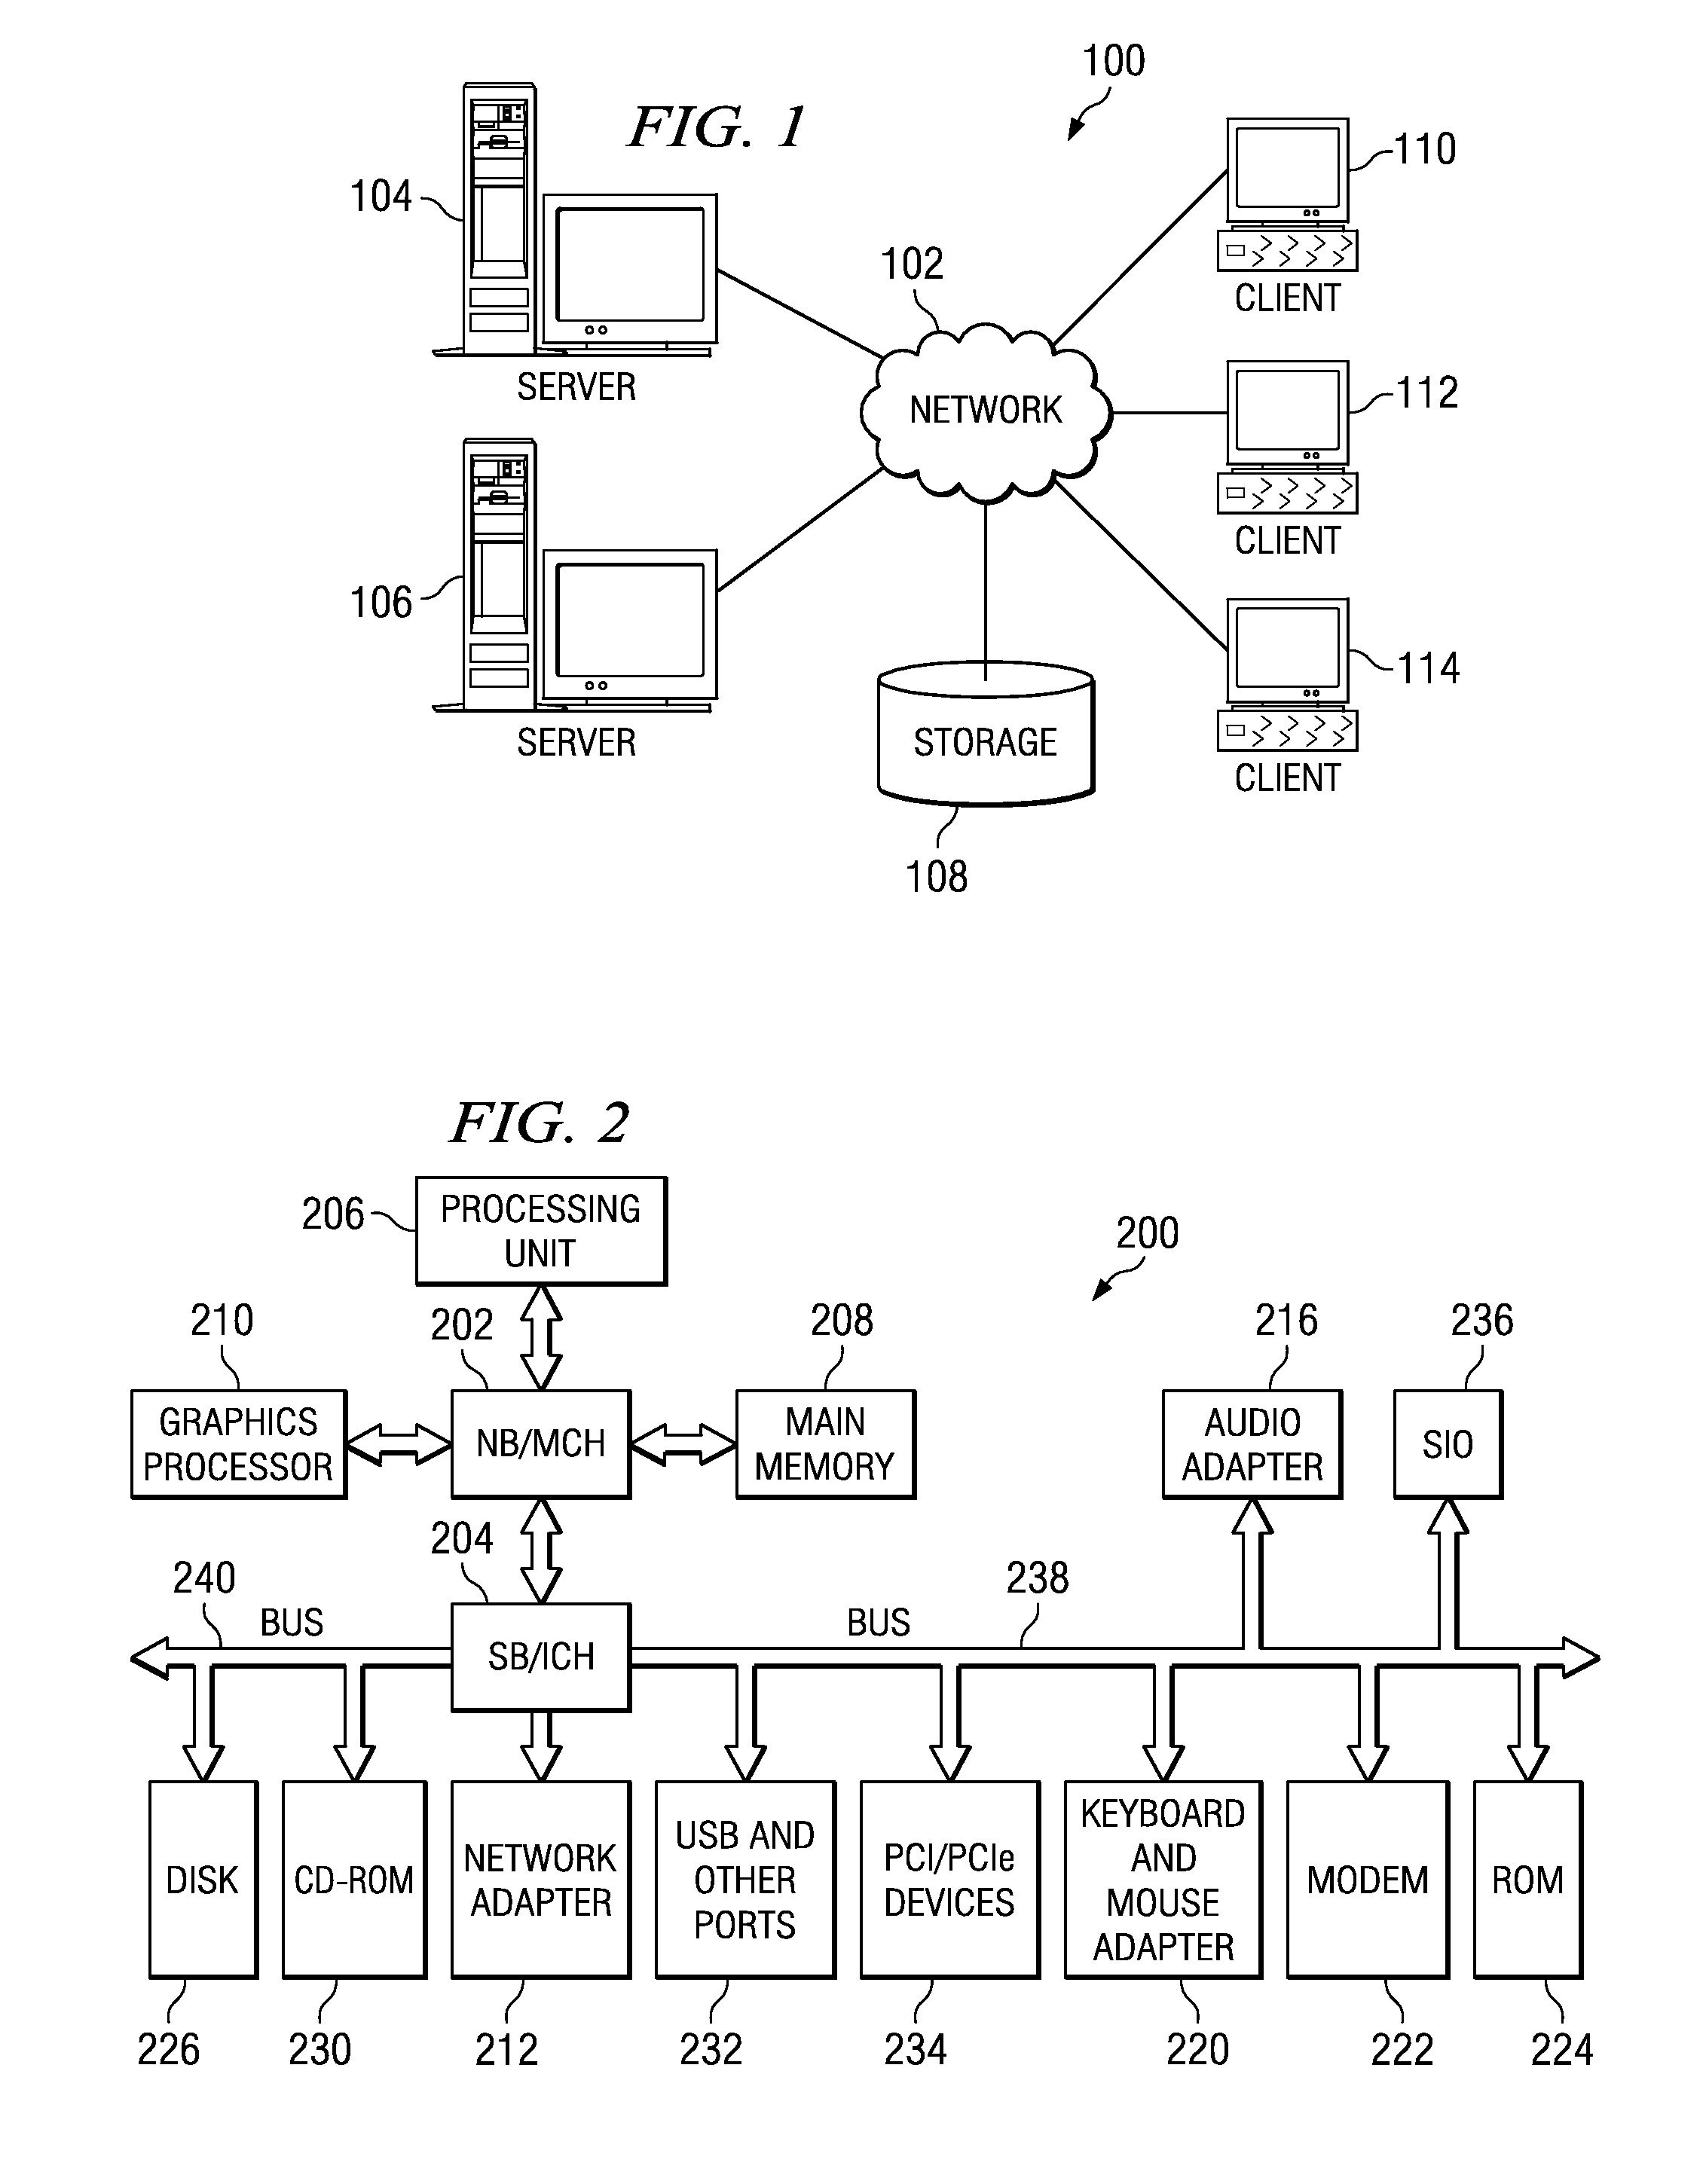 Issue unit for placing a processor into a gradual slow mode of operation in response to a detected livelock condition within a processor pipeline